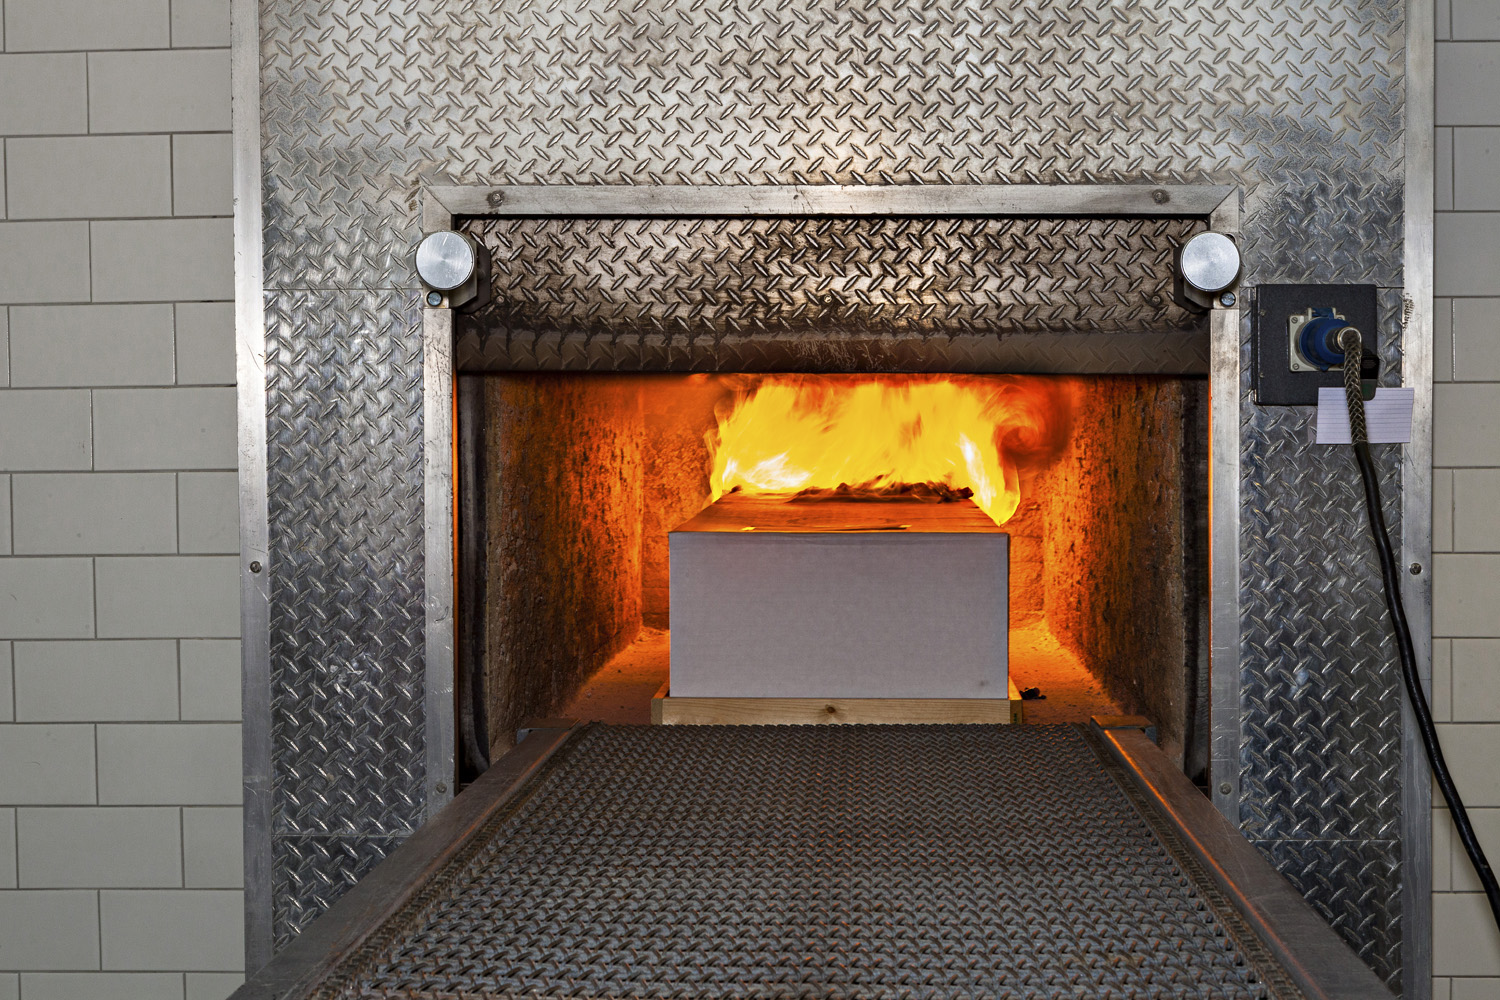 A body in the fire-based crematory oven of Lakewood Cemetery.